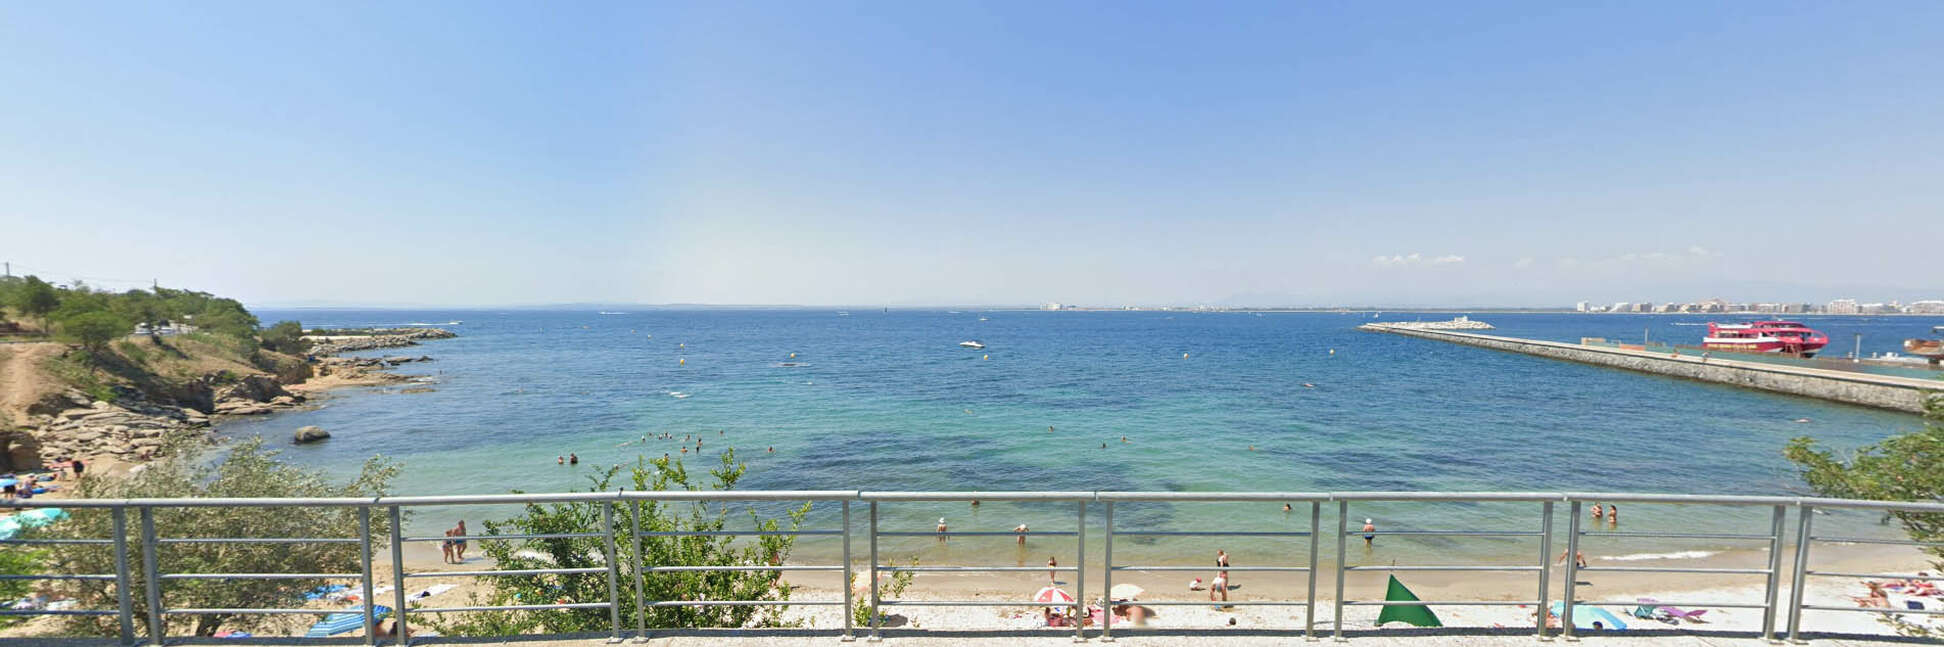 New seafront flat for sale El Far, Roses